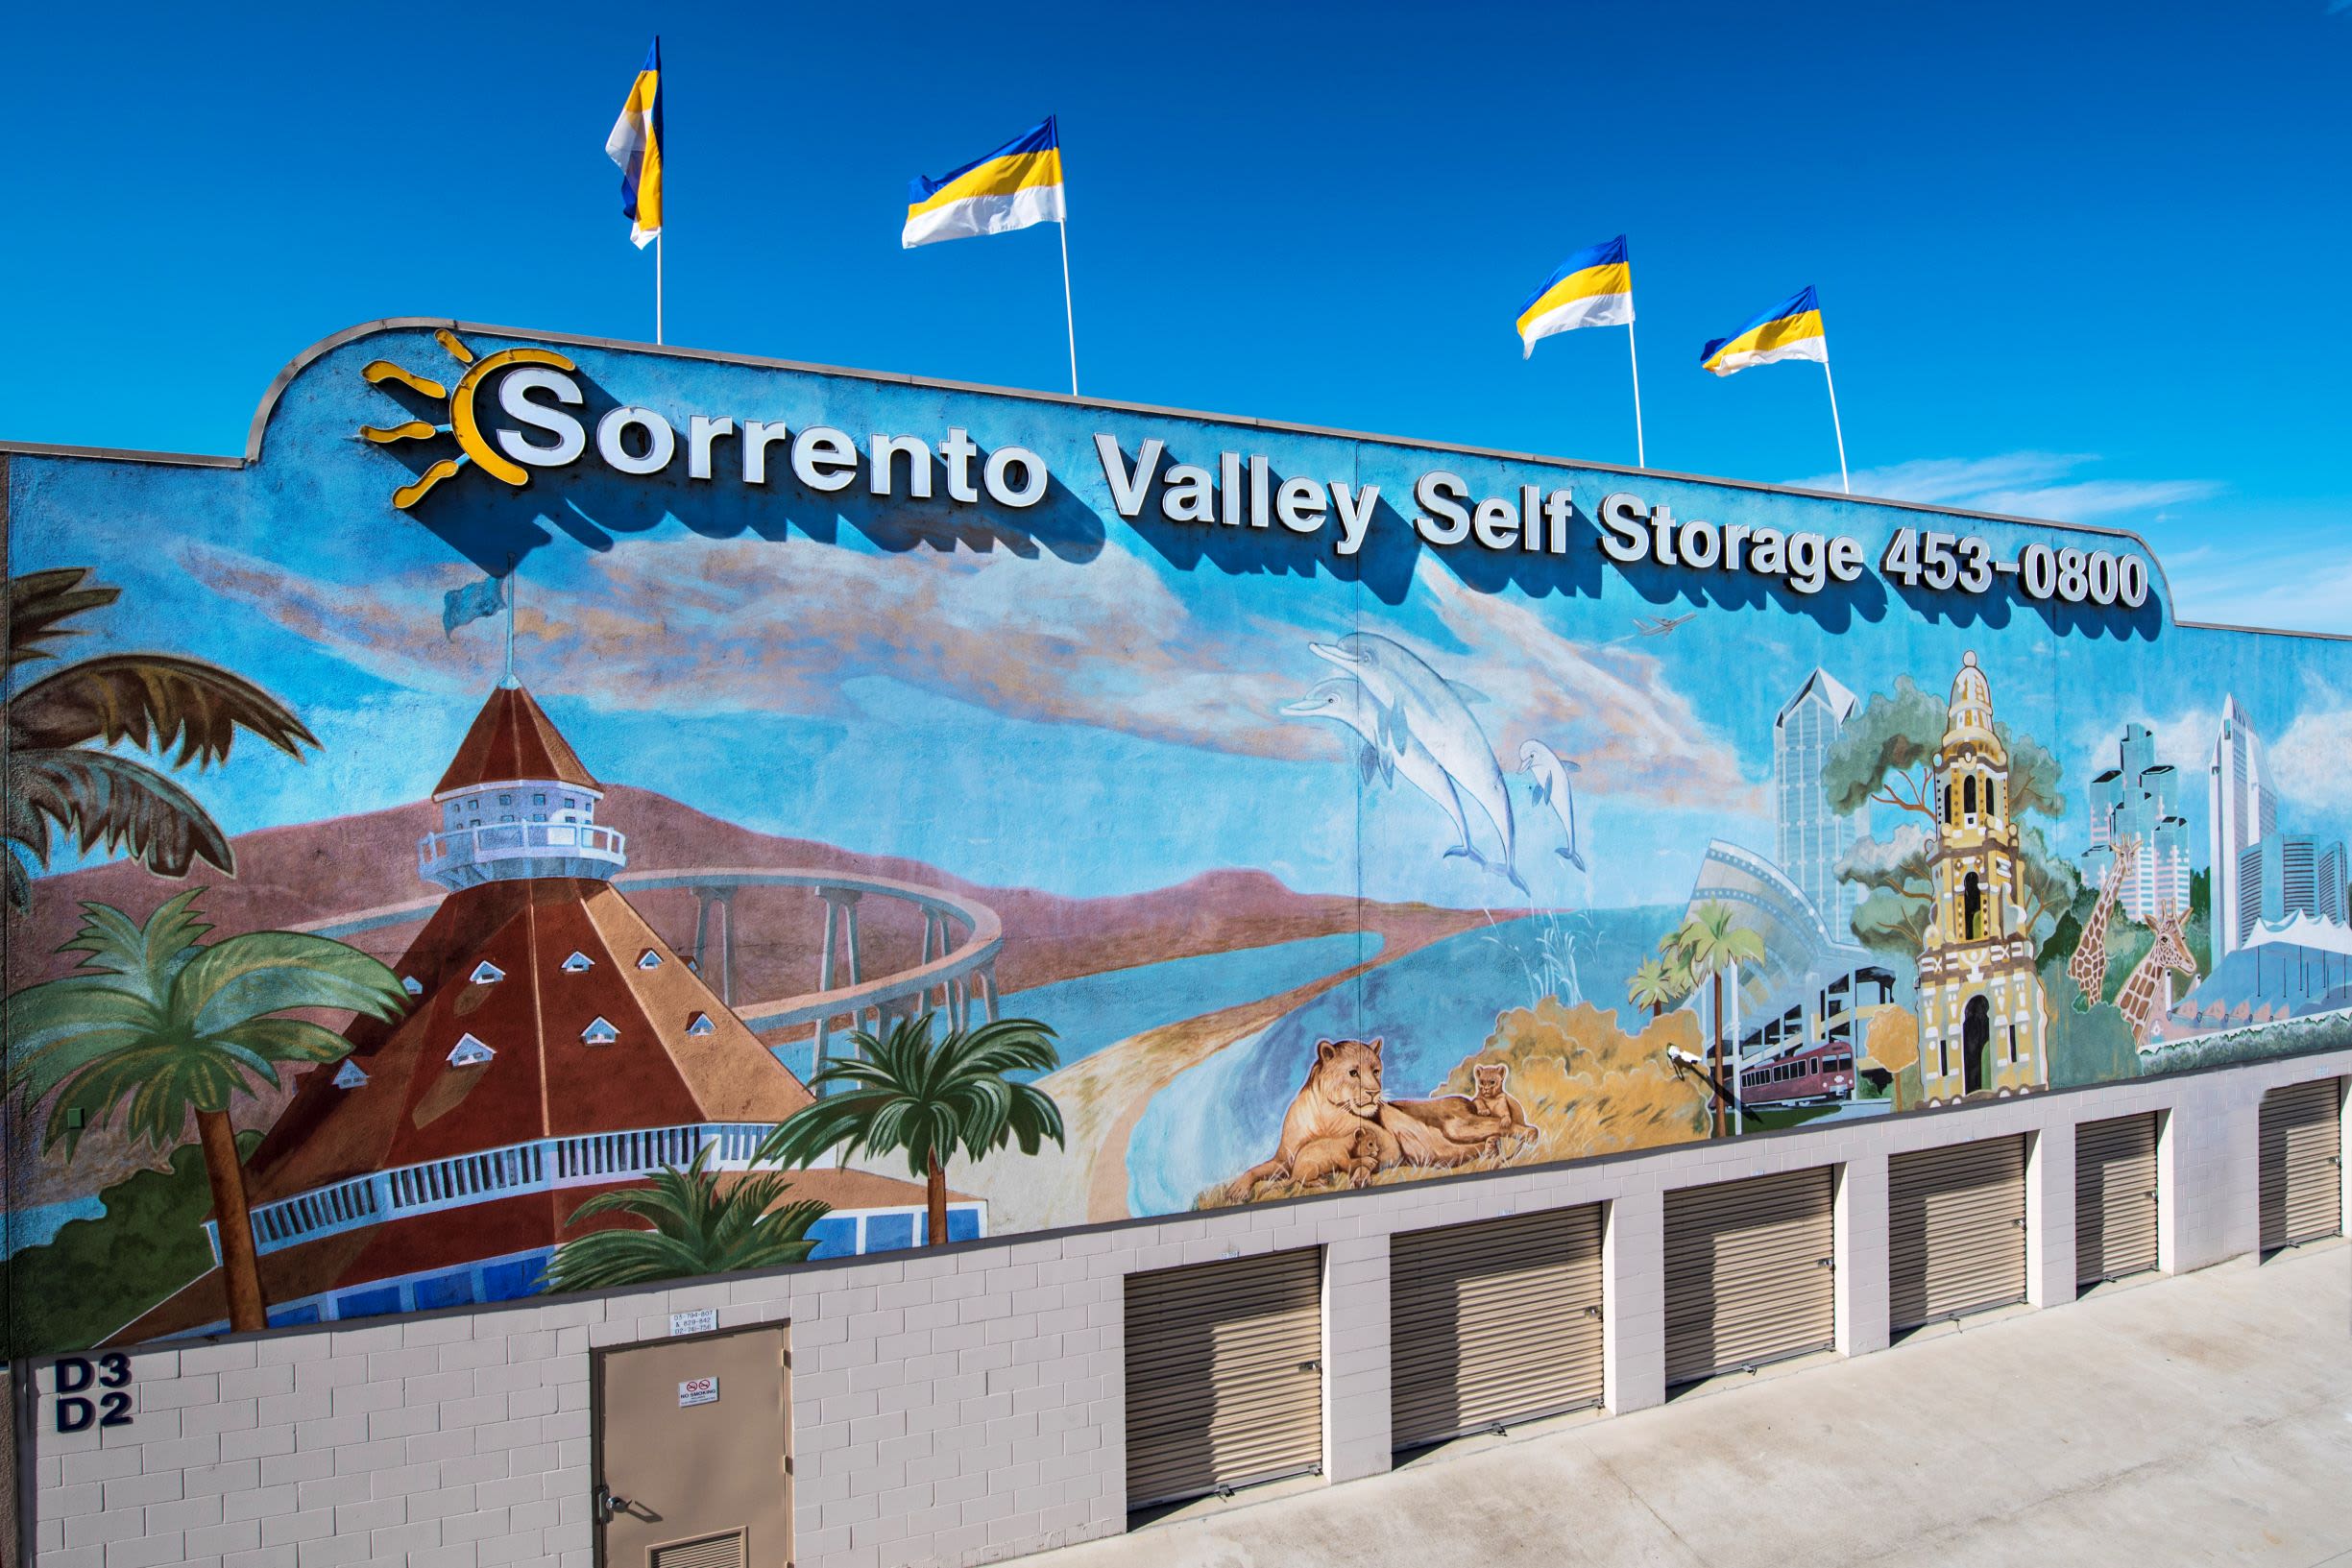 A mural at Sorrento Valley Self Storage in San Diego, California